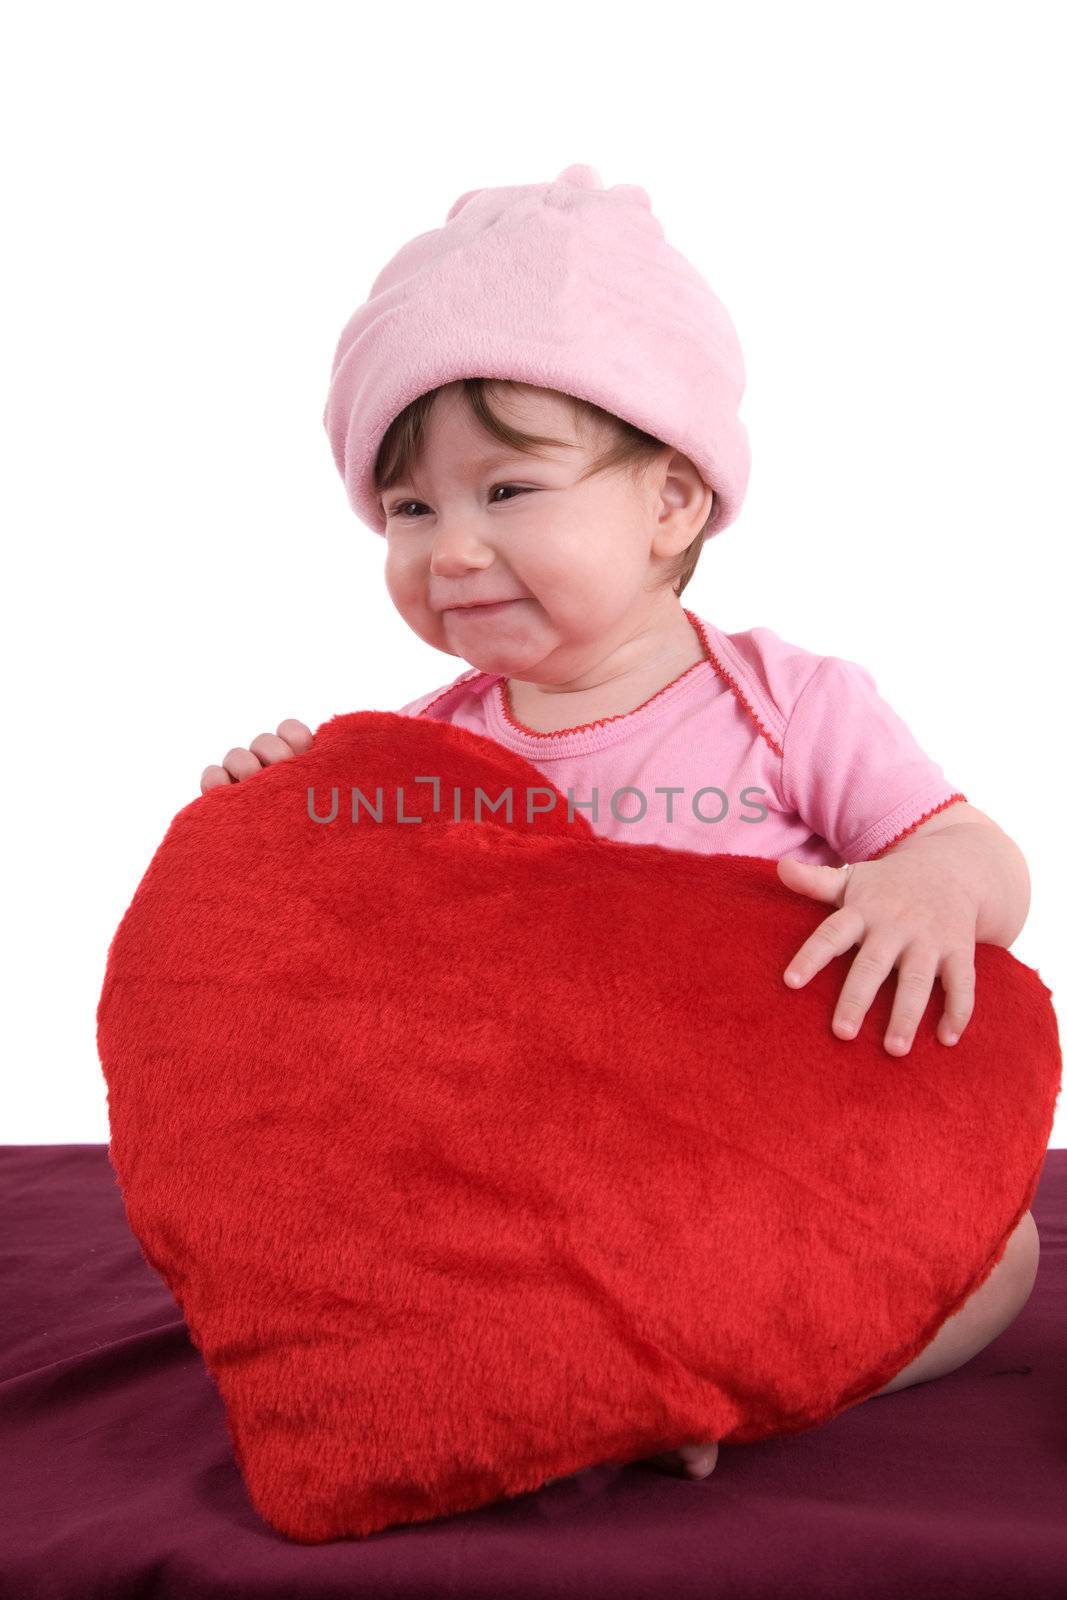 Cute little baby having fun and laughing while holding a big red heart